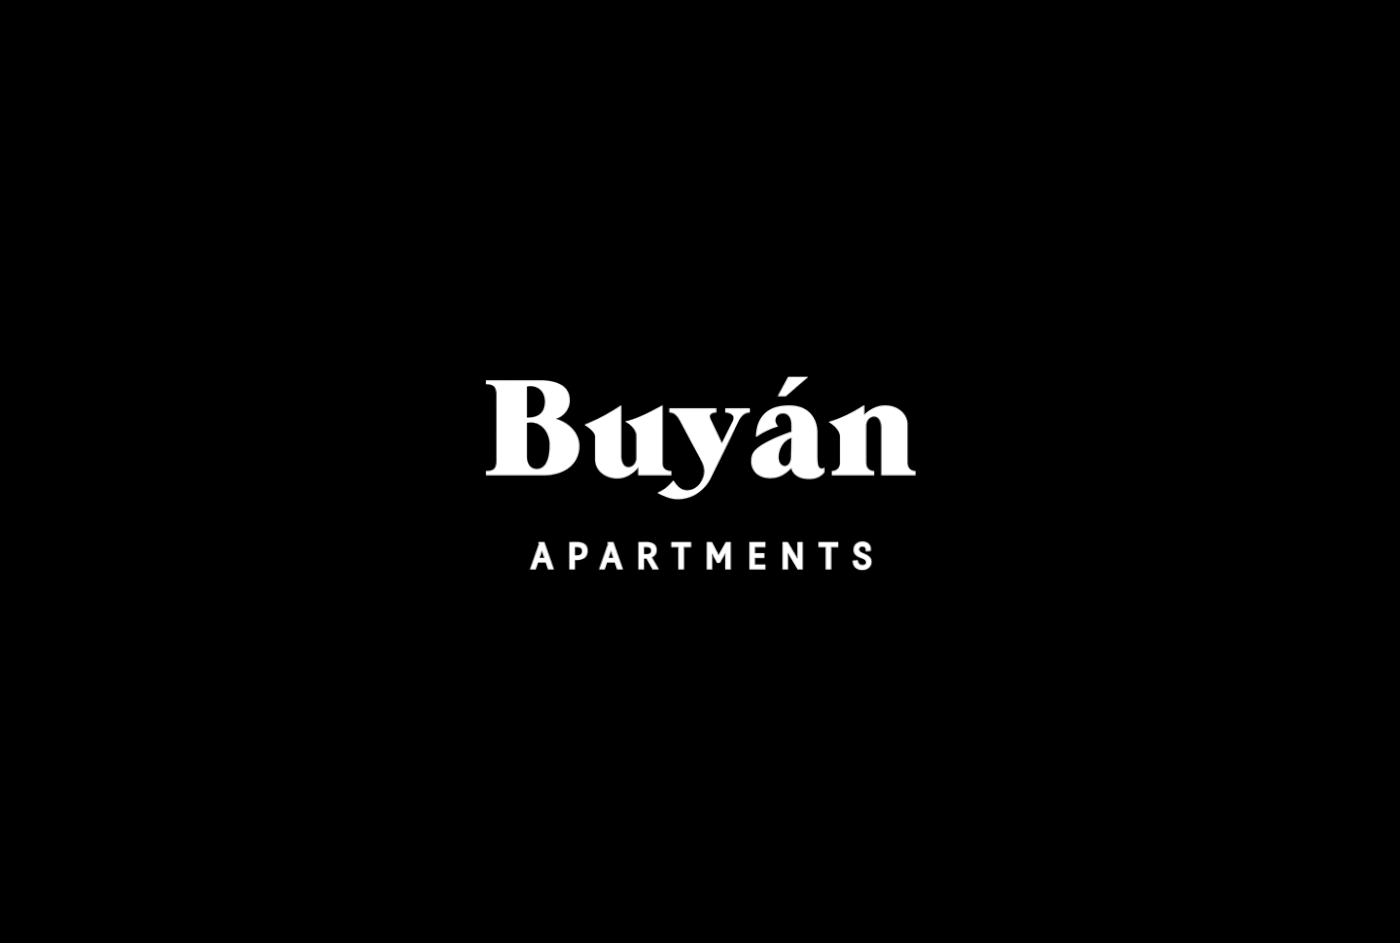 Buyan apartments building lifestyle brand Logotype identity bienal mexico graphics